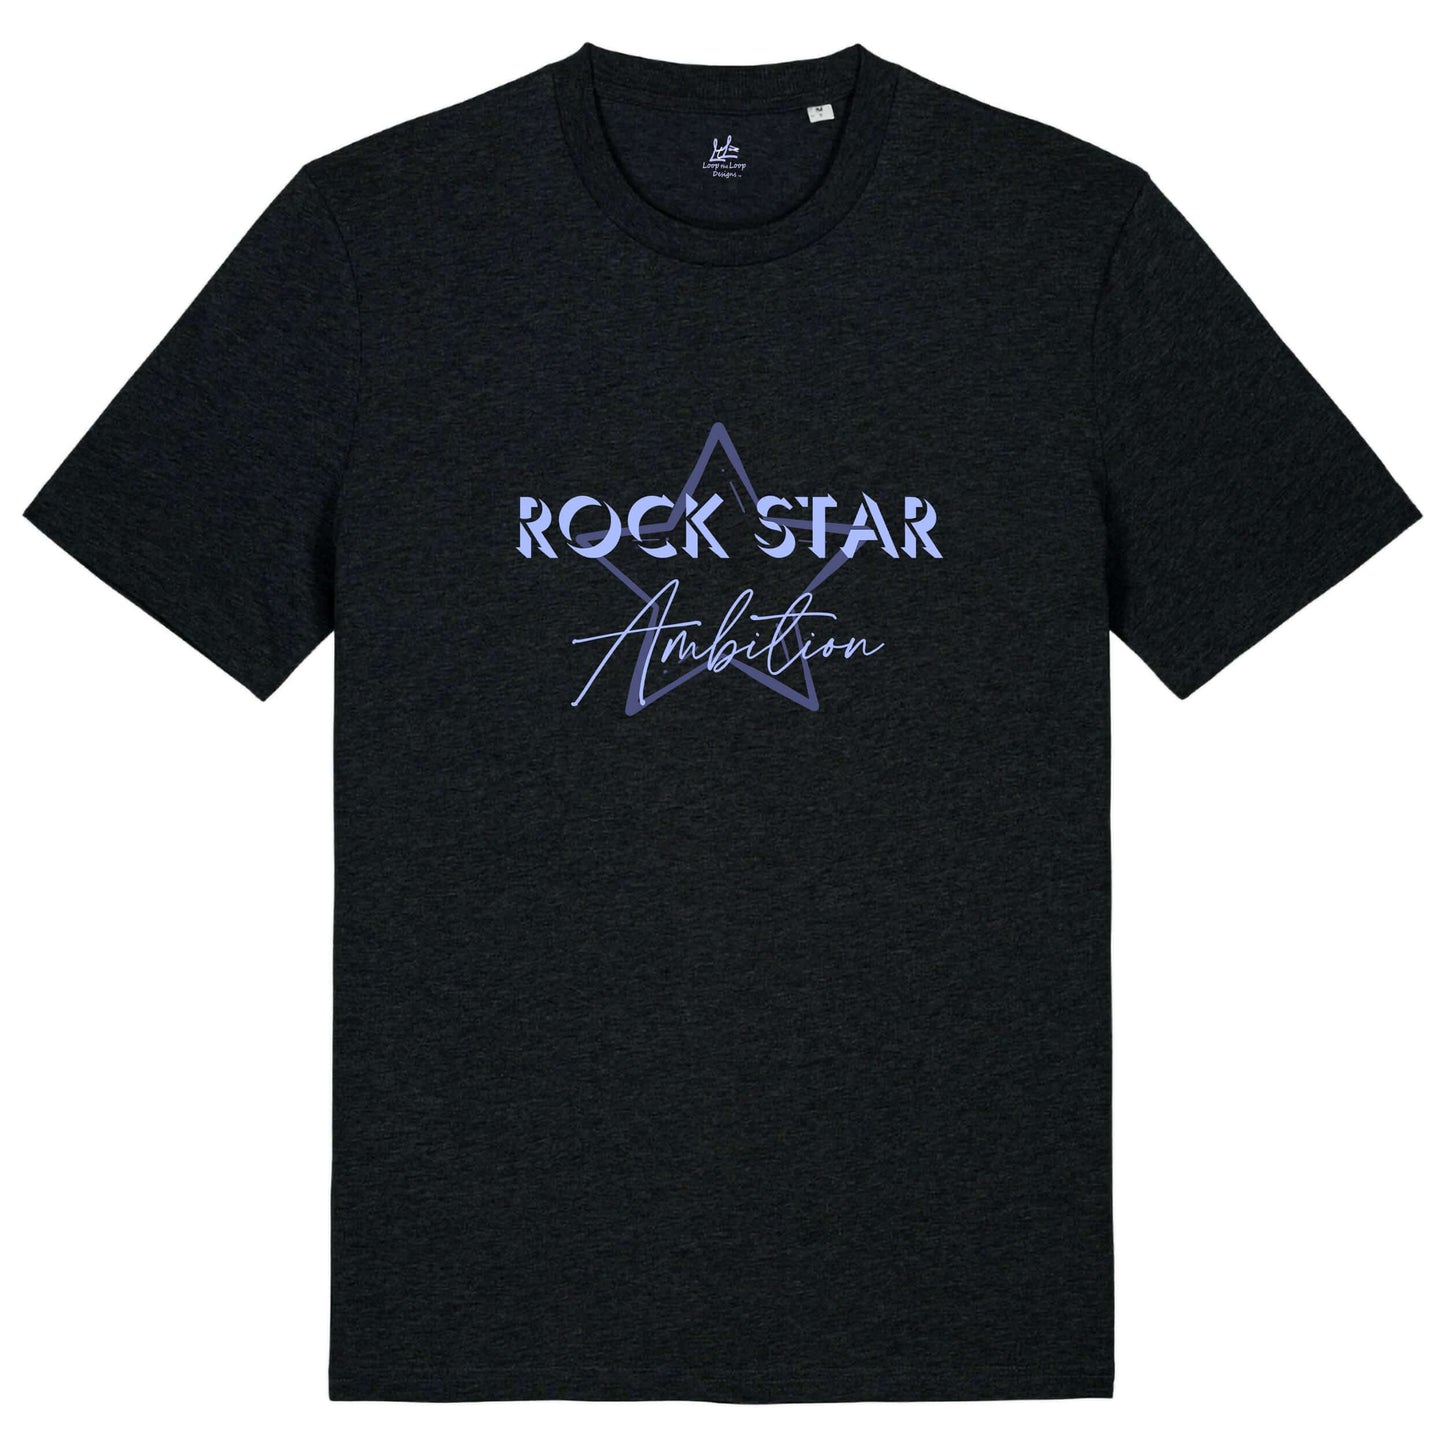 Organic Cotton t shirt. mens black short sleeve graphic tshirt. Crew neck casual wear. Band Tee Design is mid purple star outline behind wording ROCK STAR in upper case shadowed  light grey/purple text, then Ambition below in script. Rock music themed unisex top